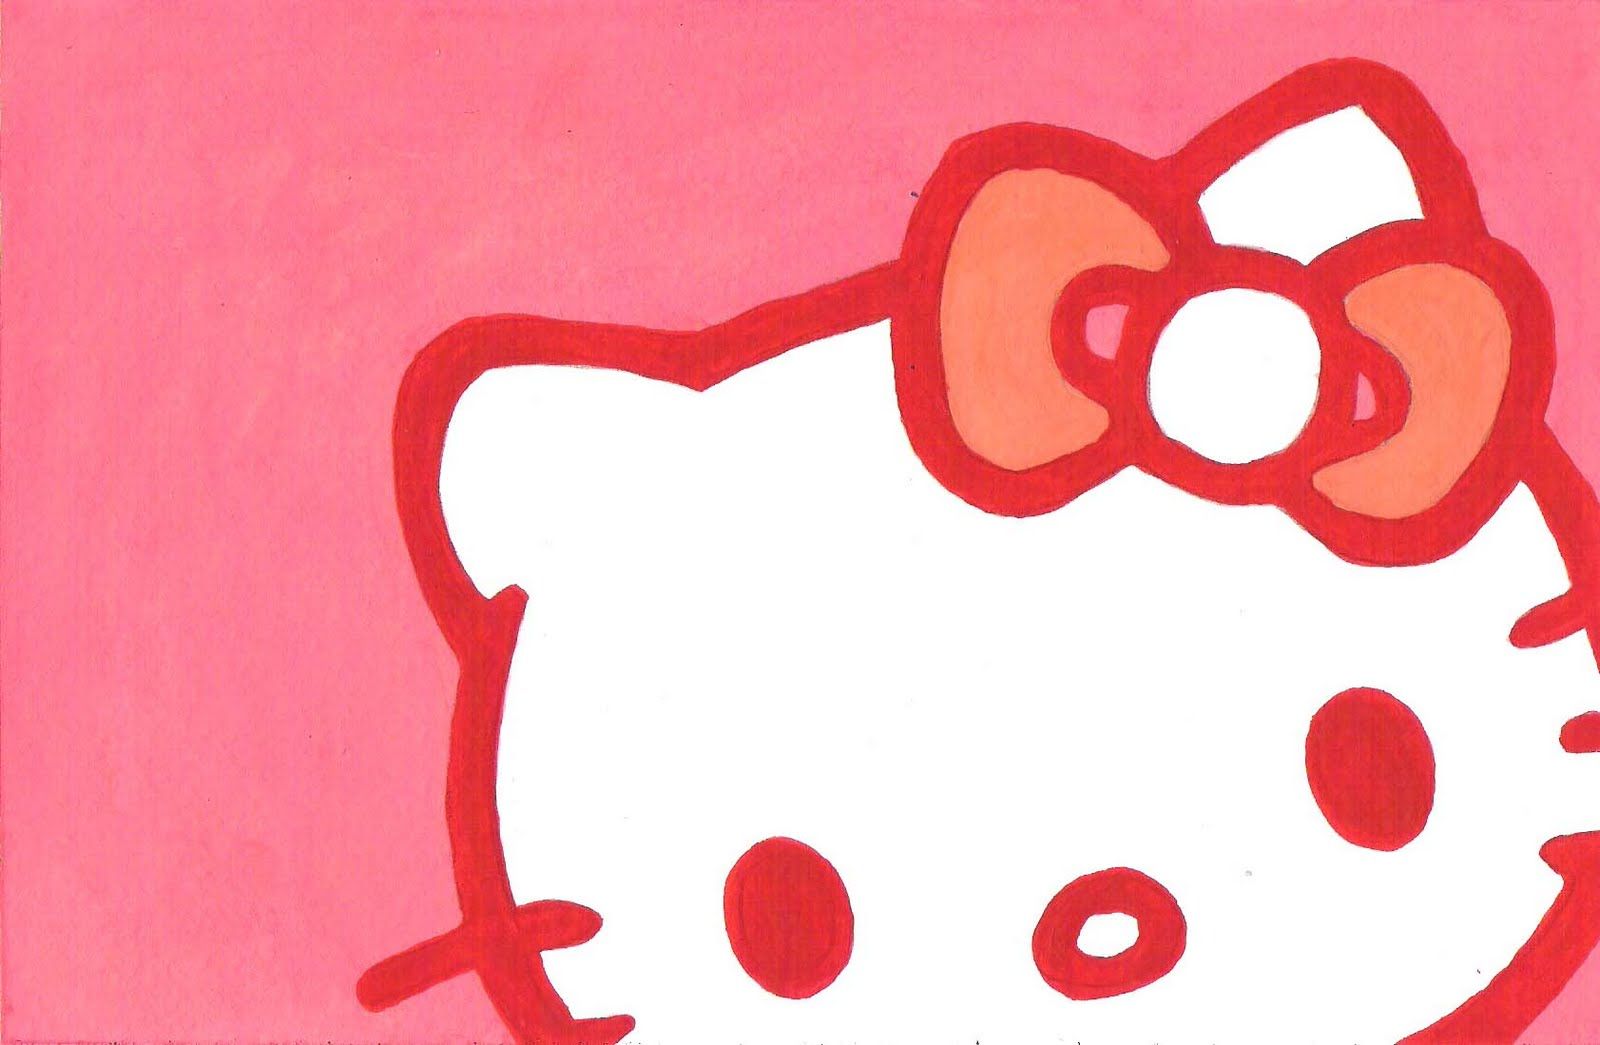 Hello Kitty Backgrounds For Laptops